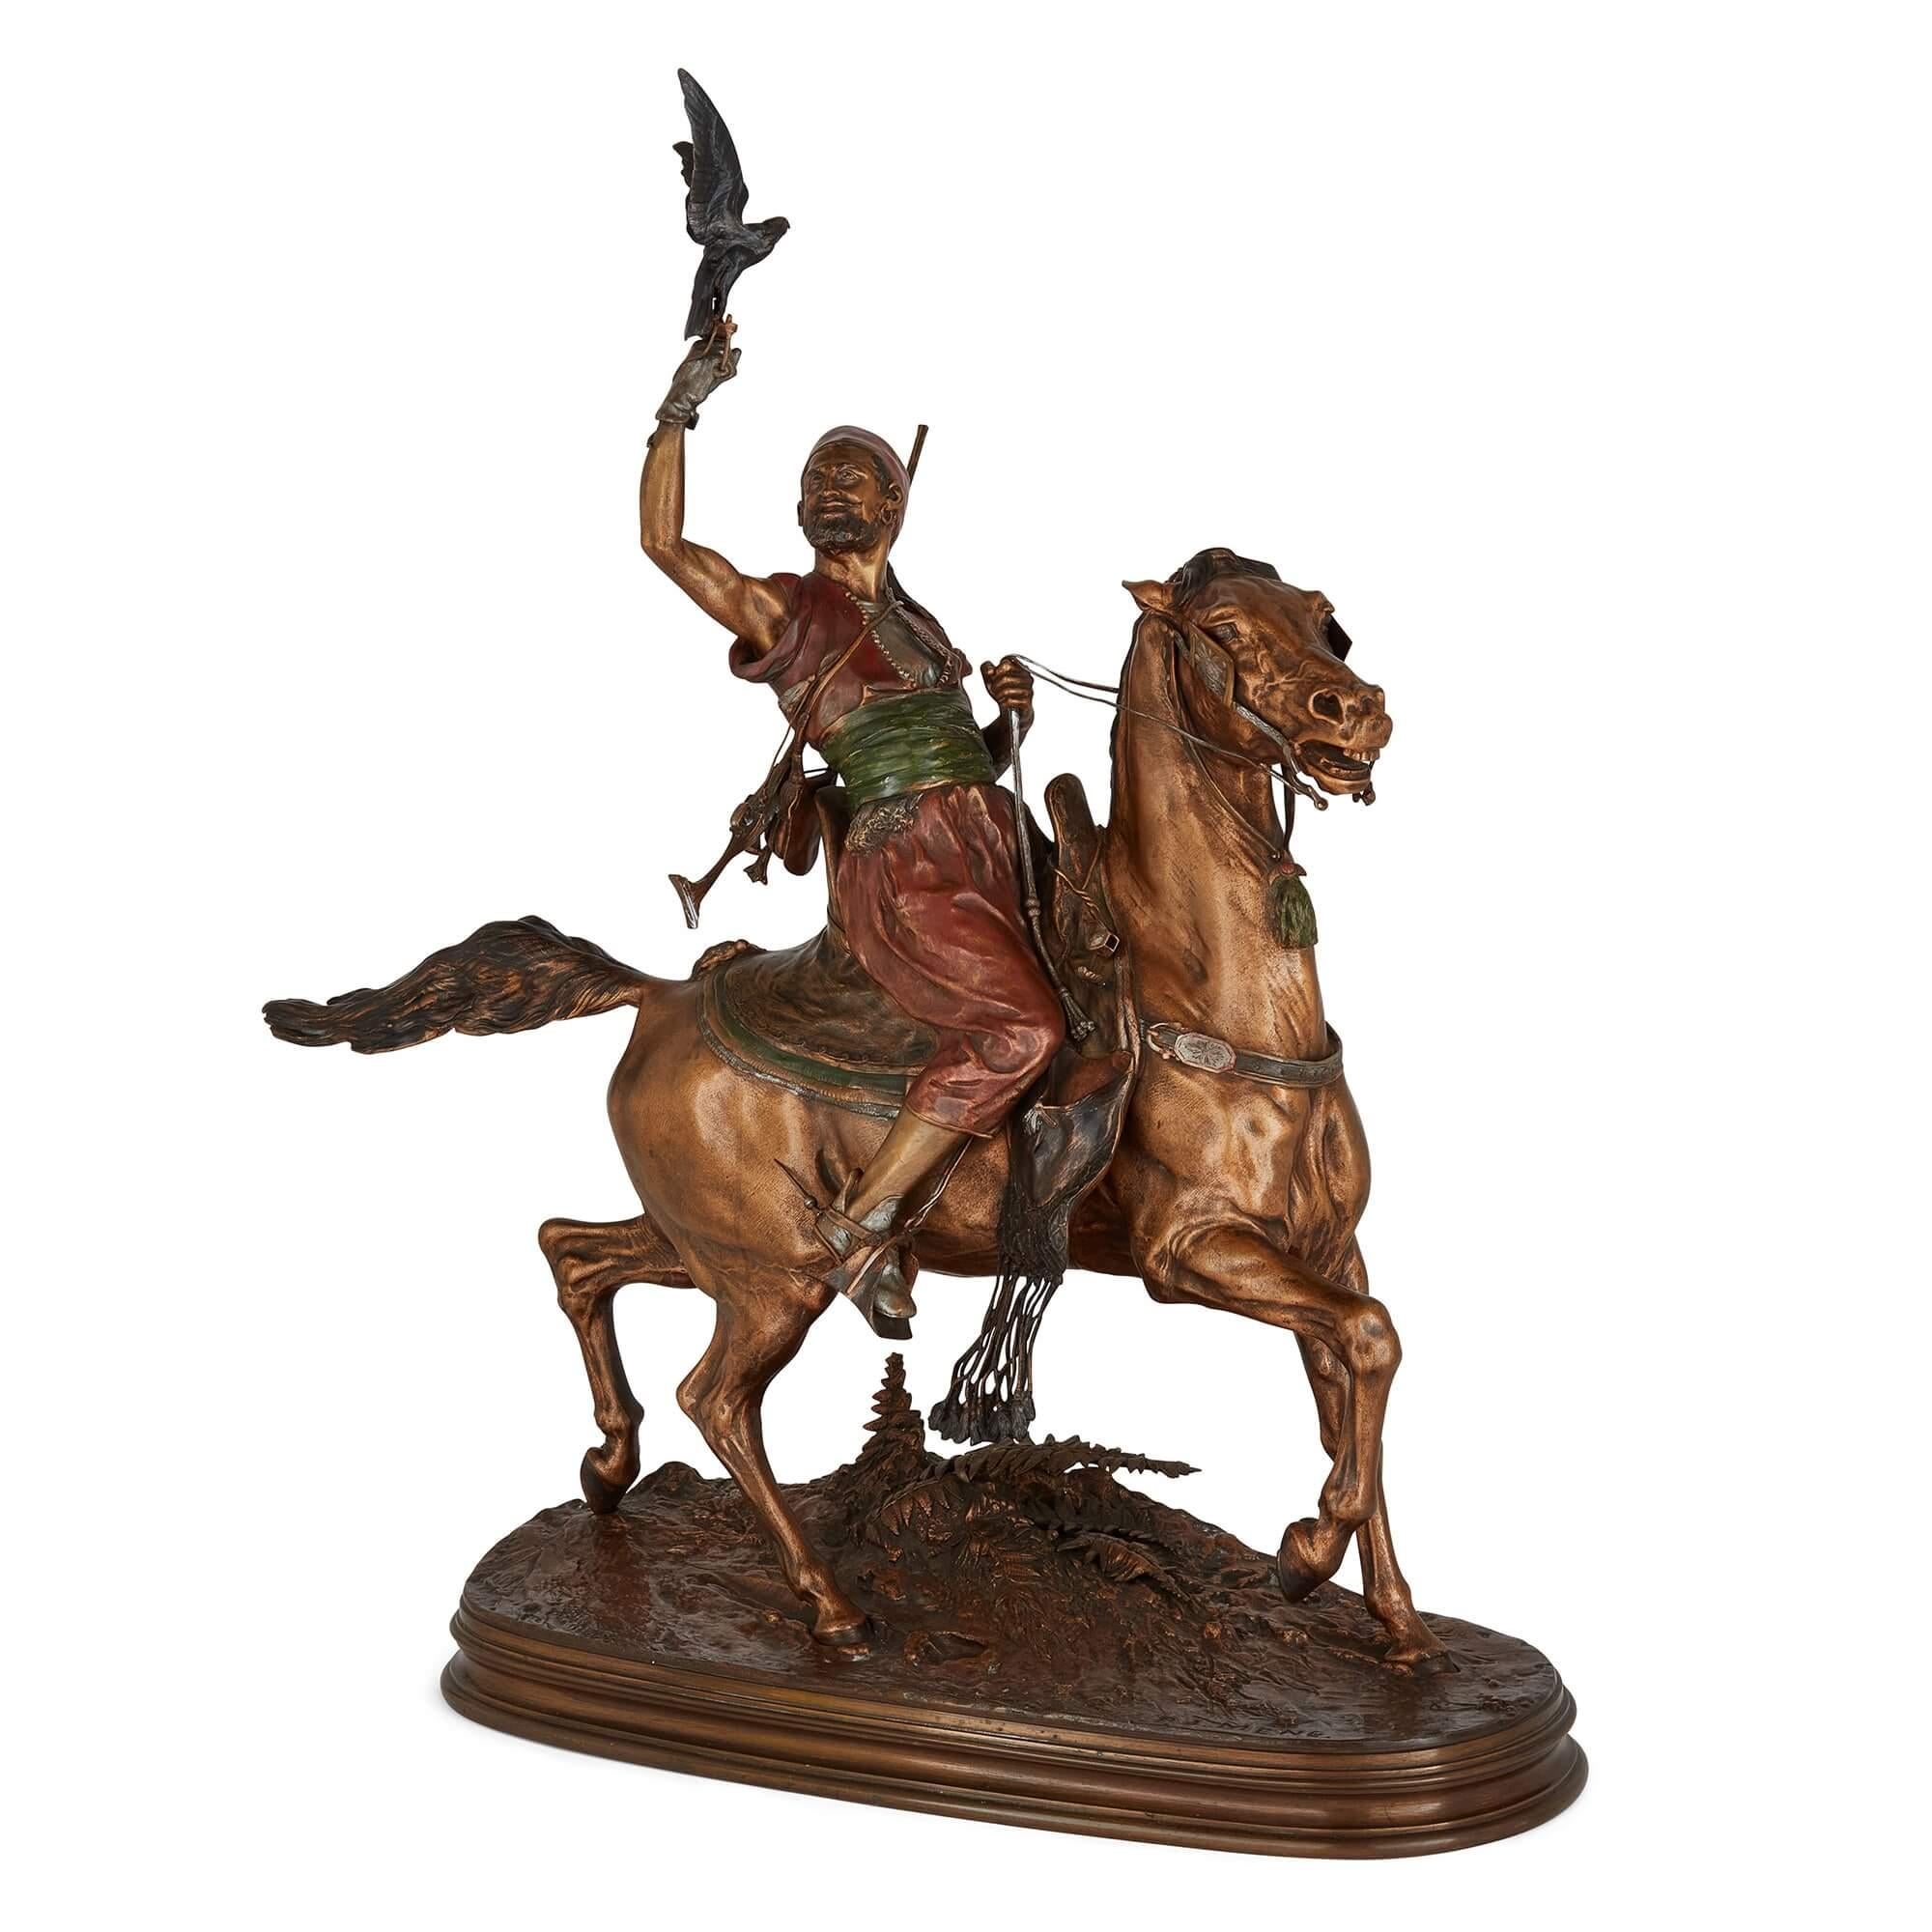 'The Arab Falconer', antique painted bronze sculpture after Pierre-Jules Mêne
French, 19th Century 
Height 80cm, width 71cm, depth 31cm

After the celebrated French animalier sculptor, Pierre-Jules Mêne (1810-1879), the sculpture is known as ‘The